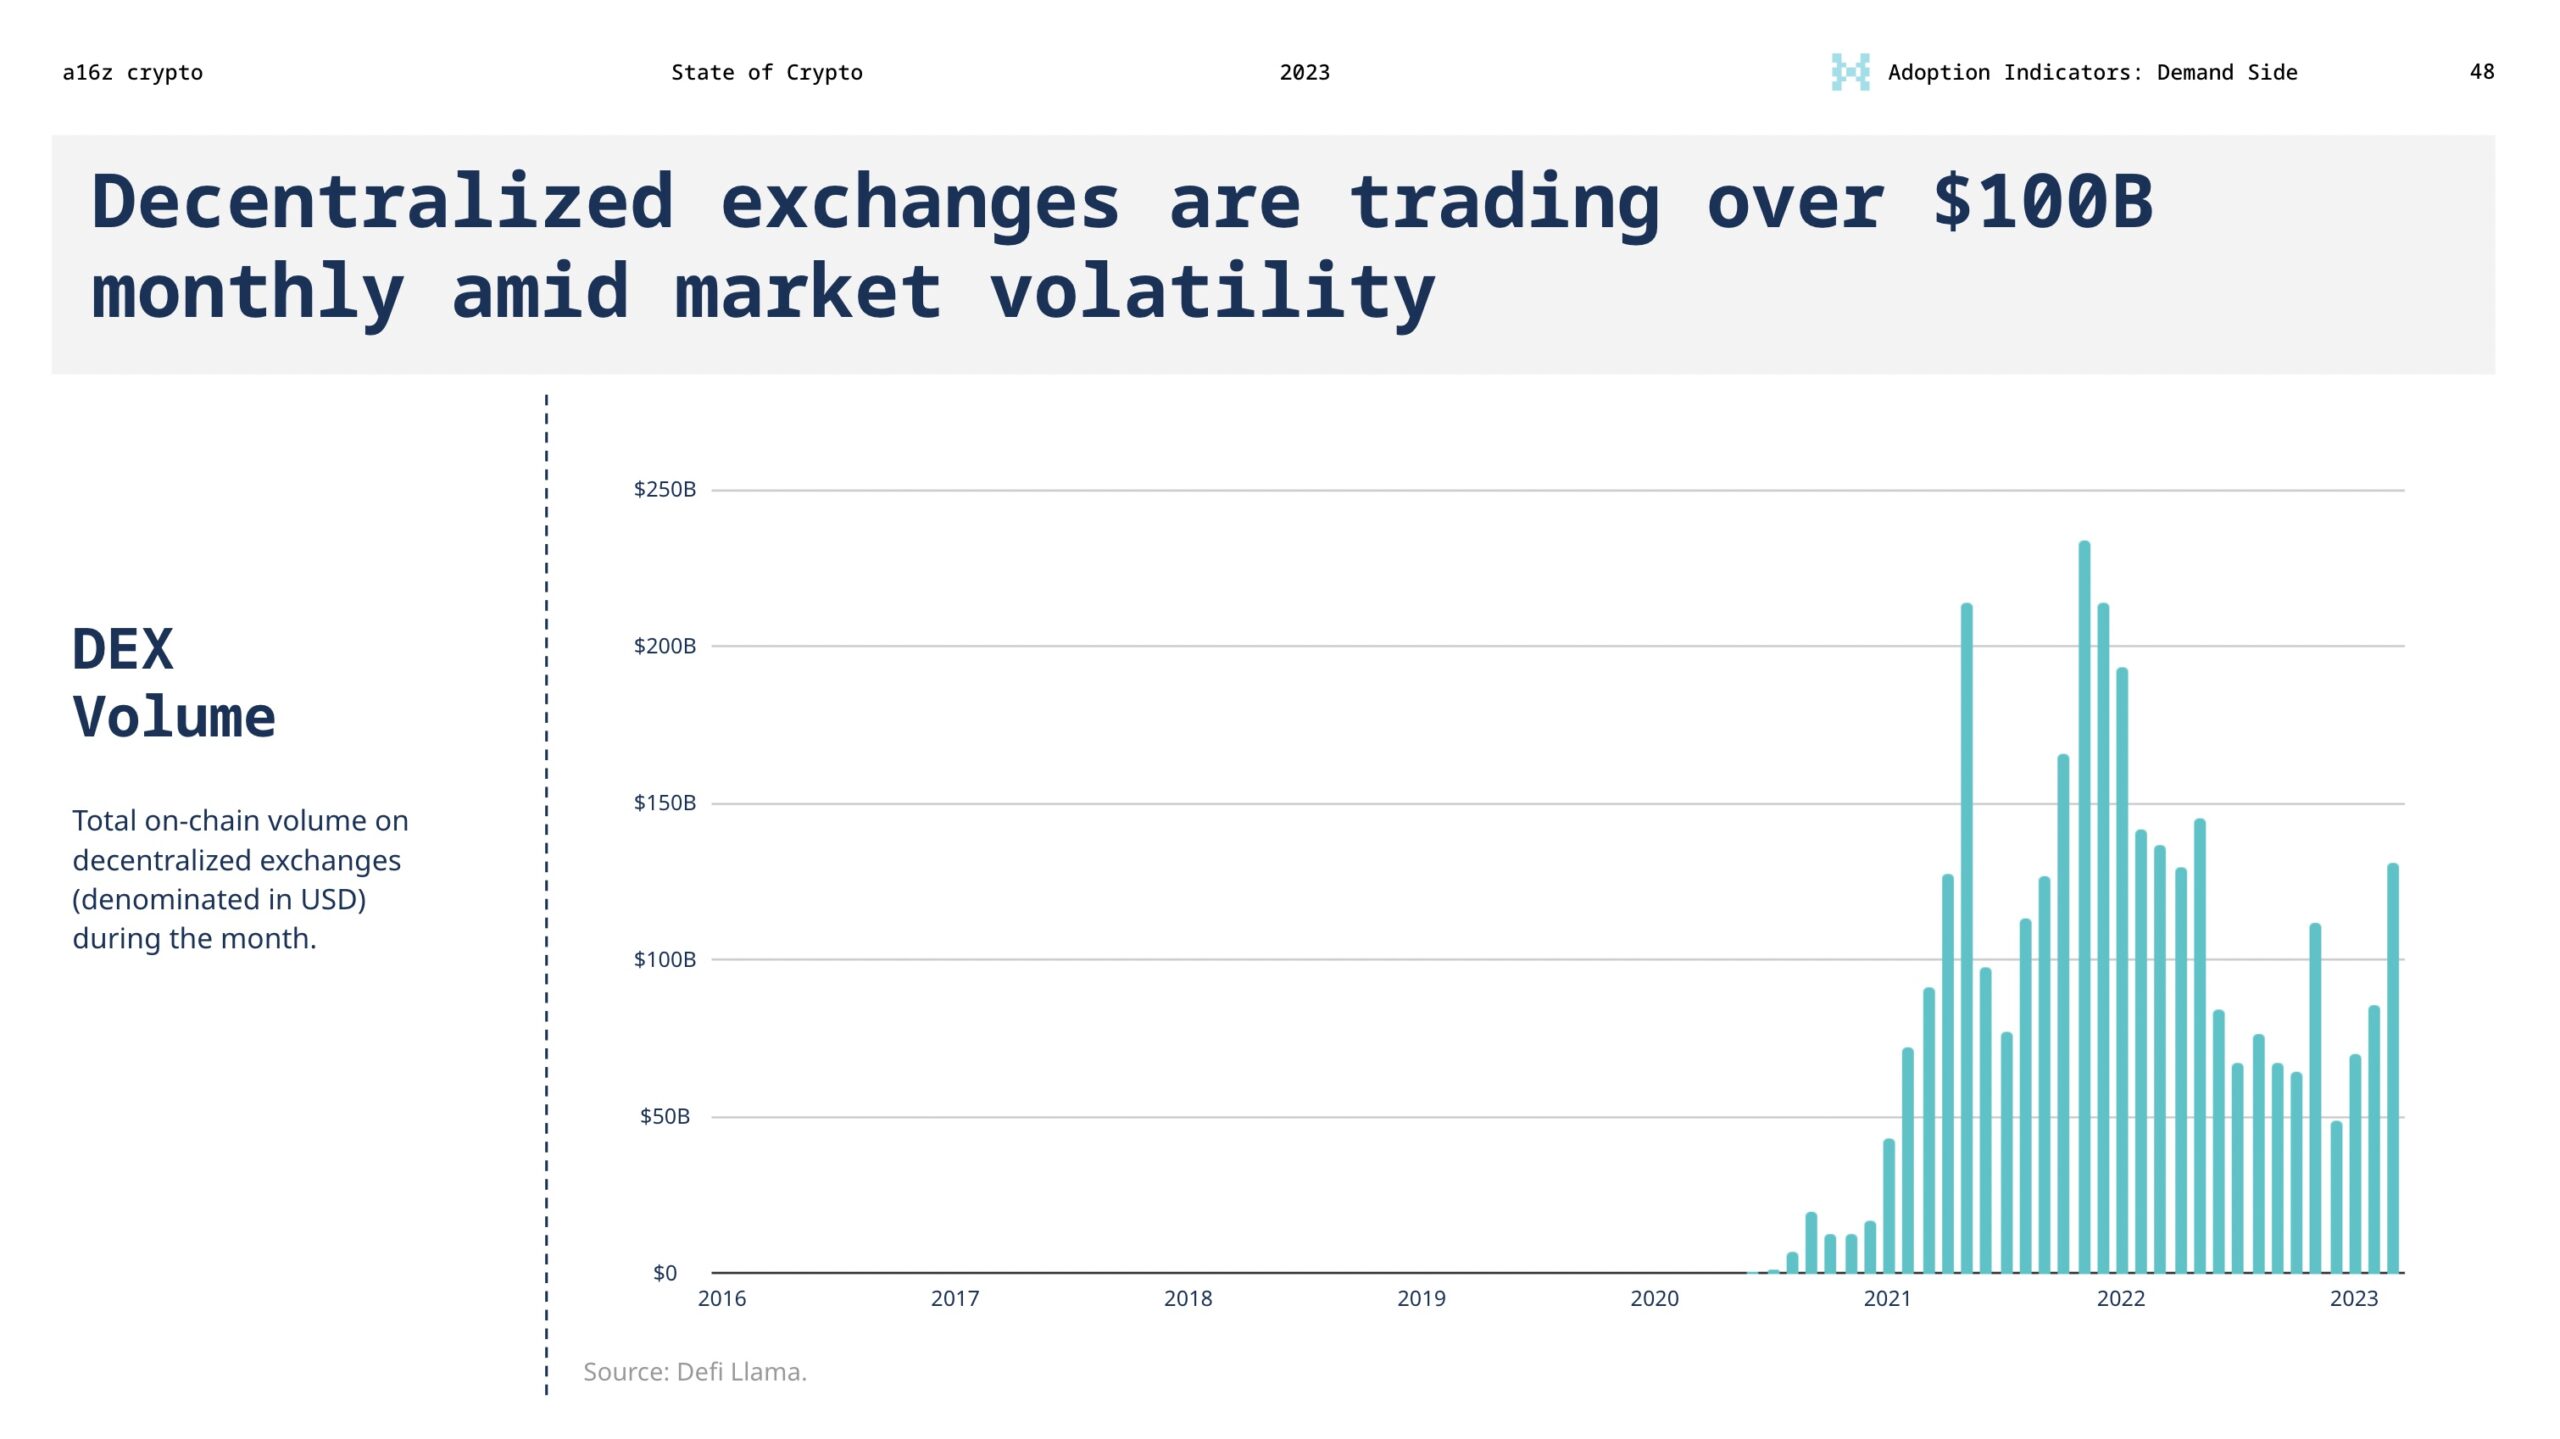 Decentralized exchanges are trading over 100B despite volatility